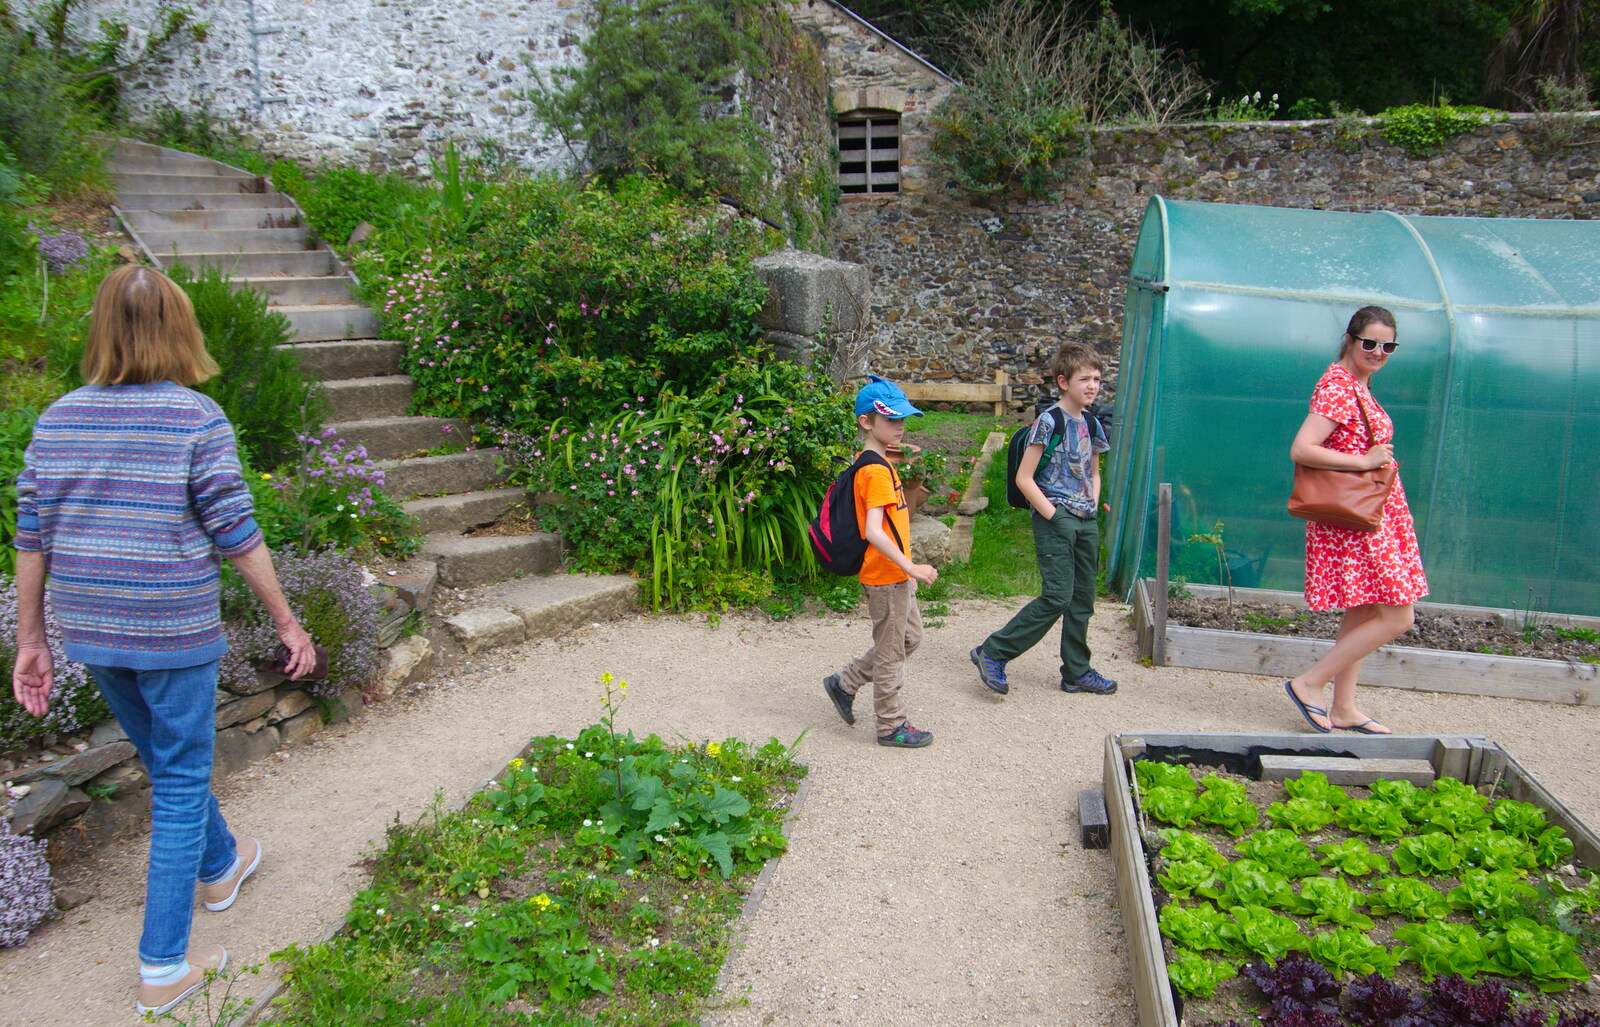 Chagford Lido and a Trip to Parke, Bovey Tracey, Devon - 25th May 2019: The gang in the lettuce beds